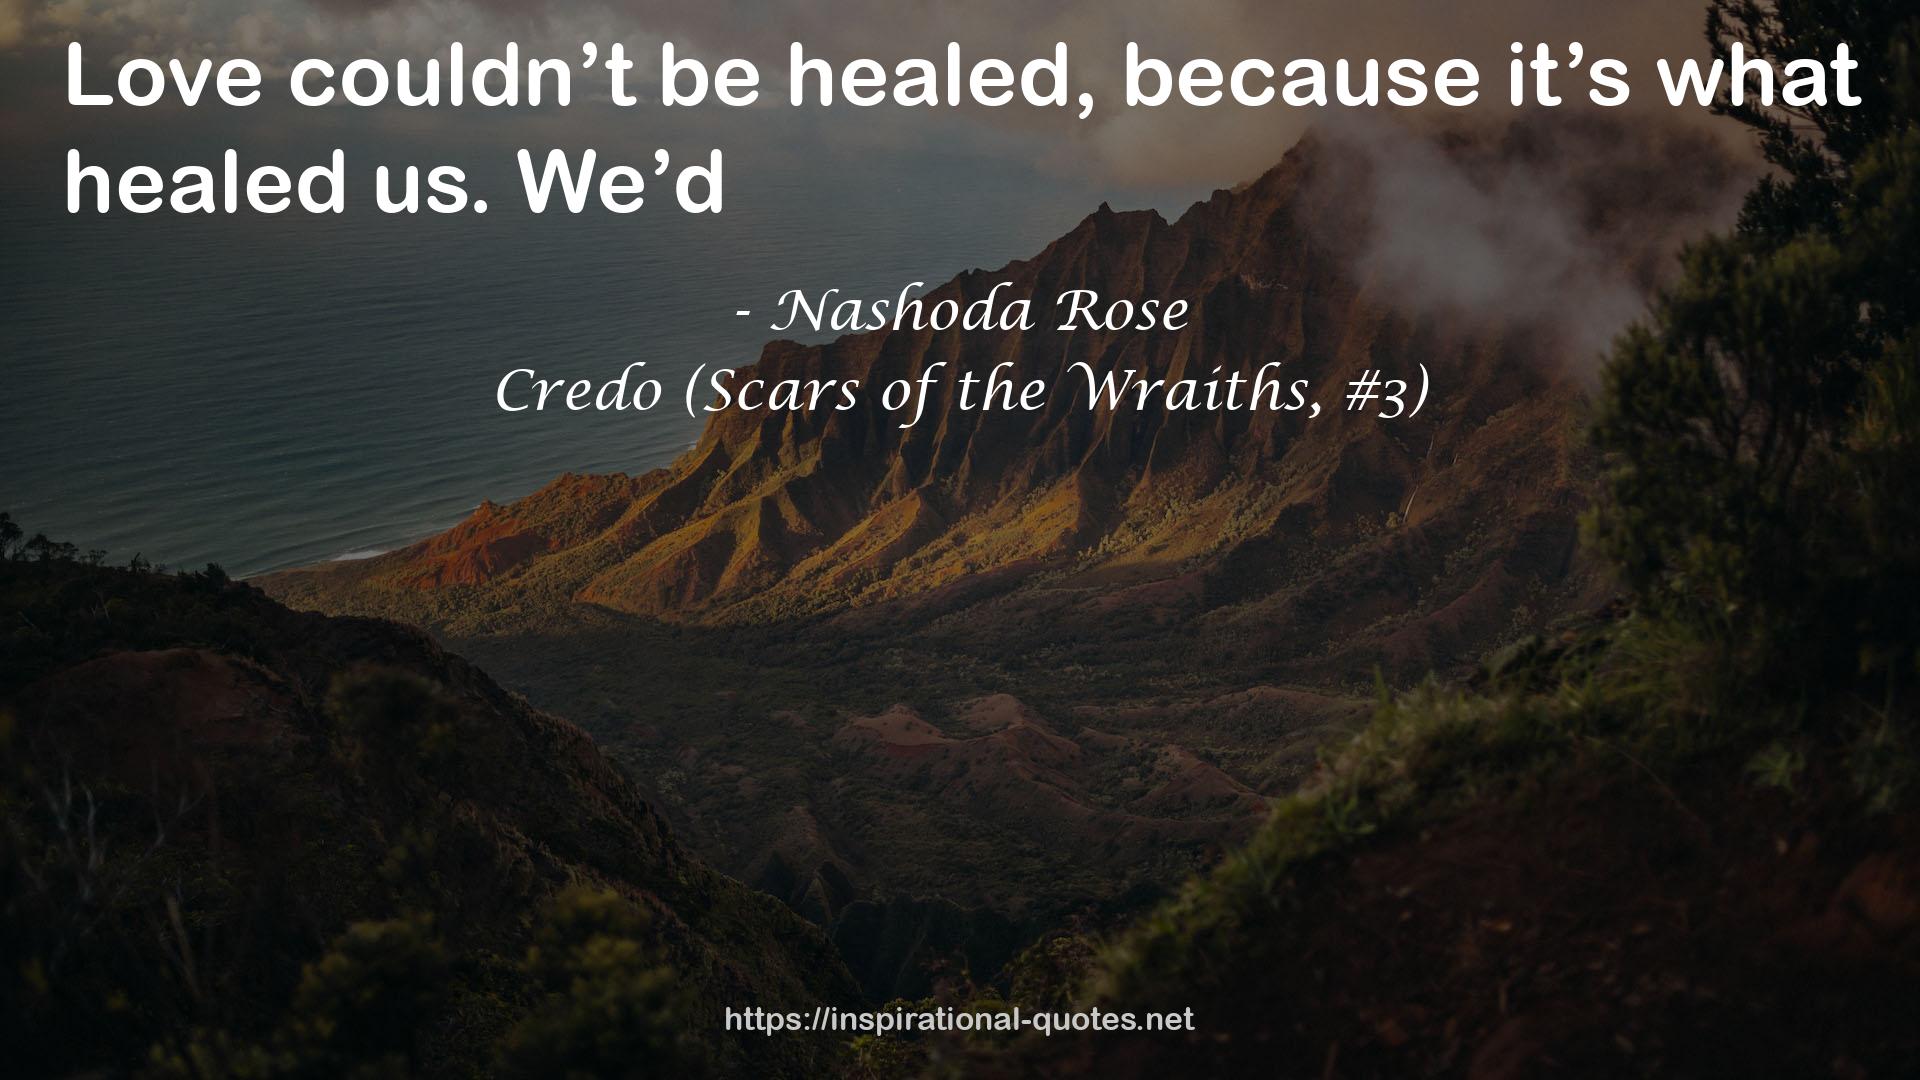 Credo (Scars of the Wraiths, #3) QUOTES